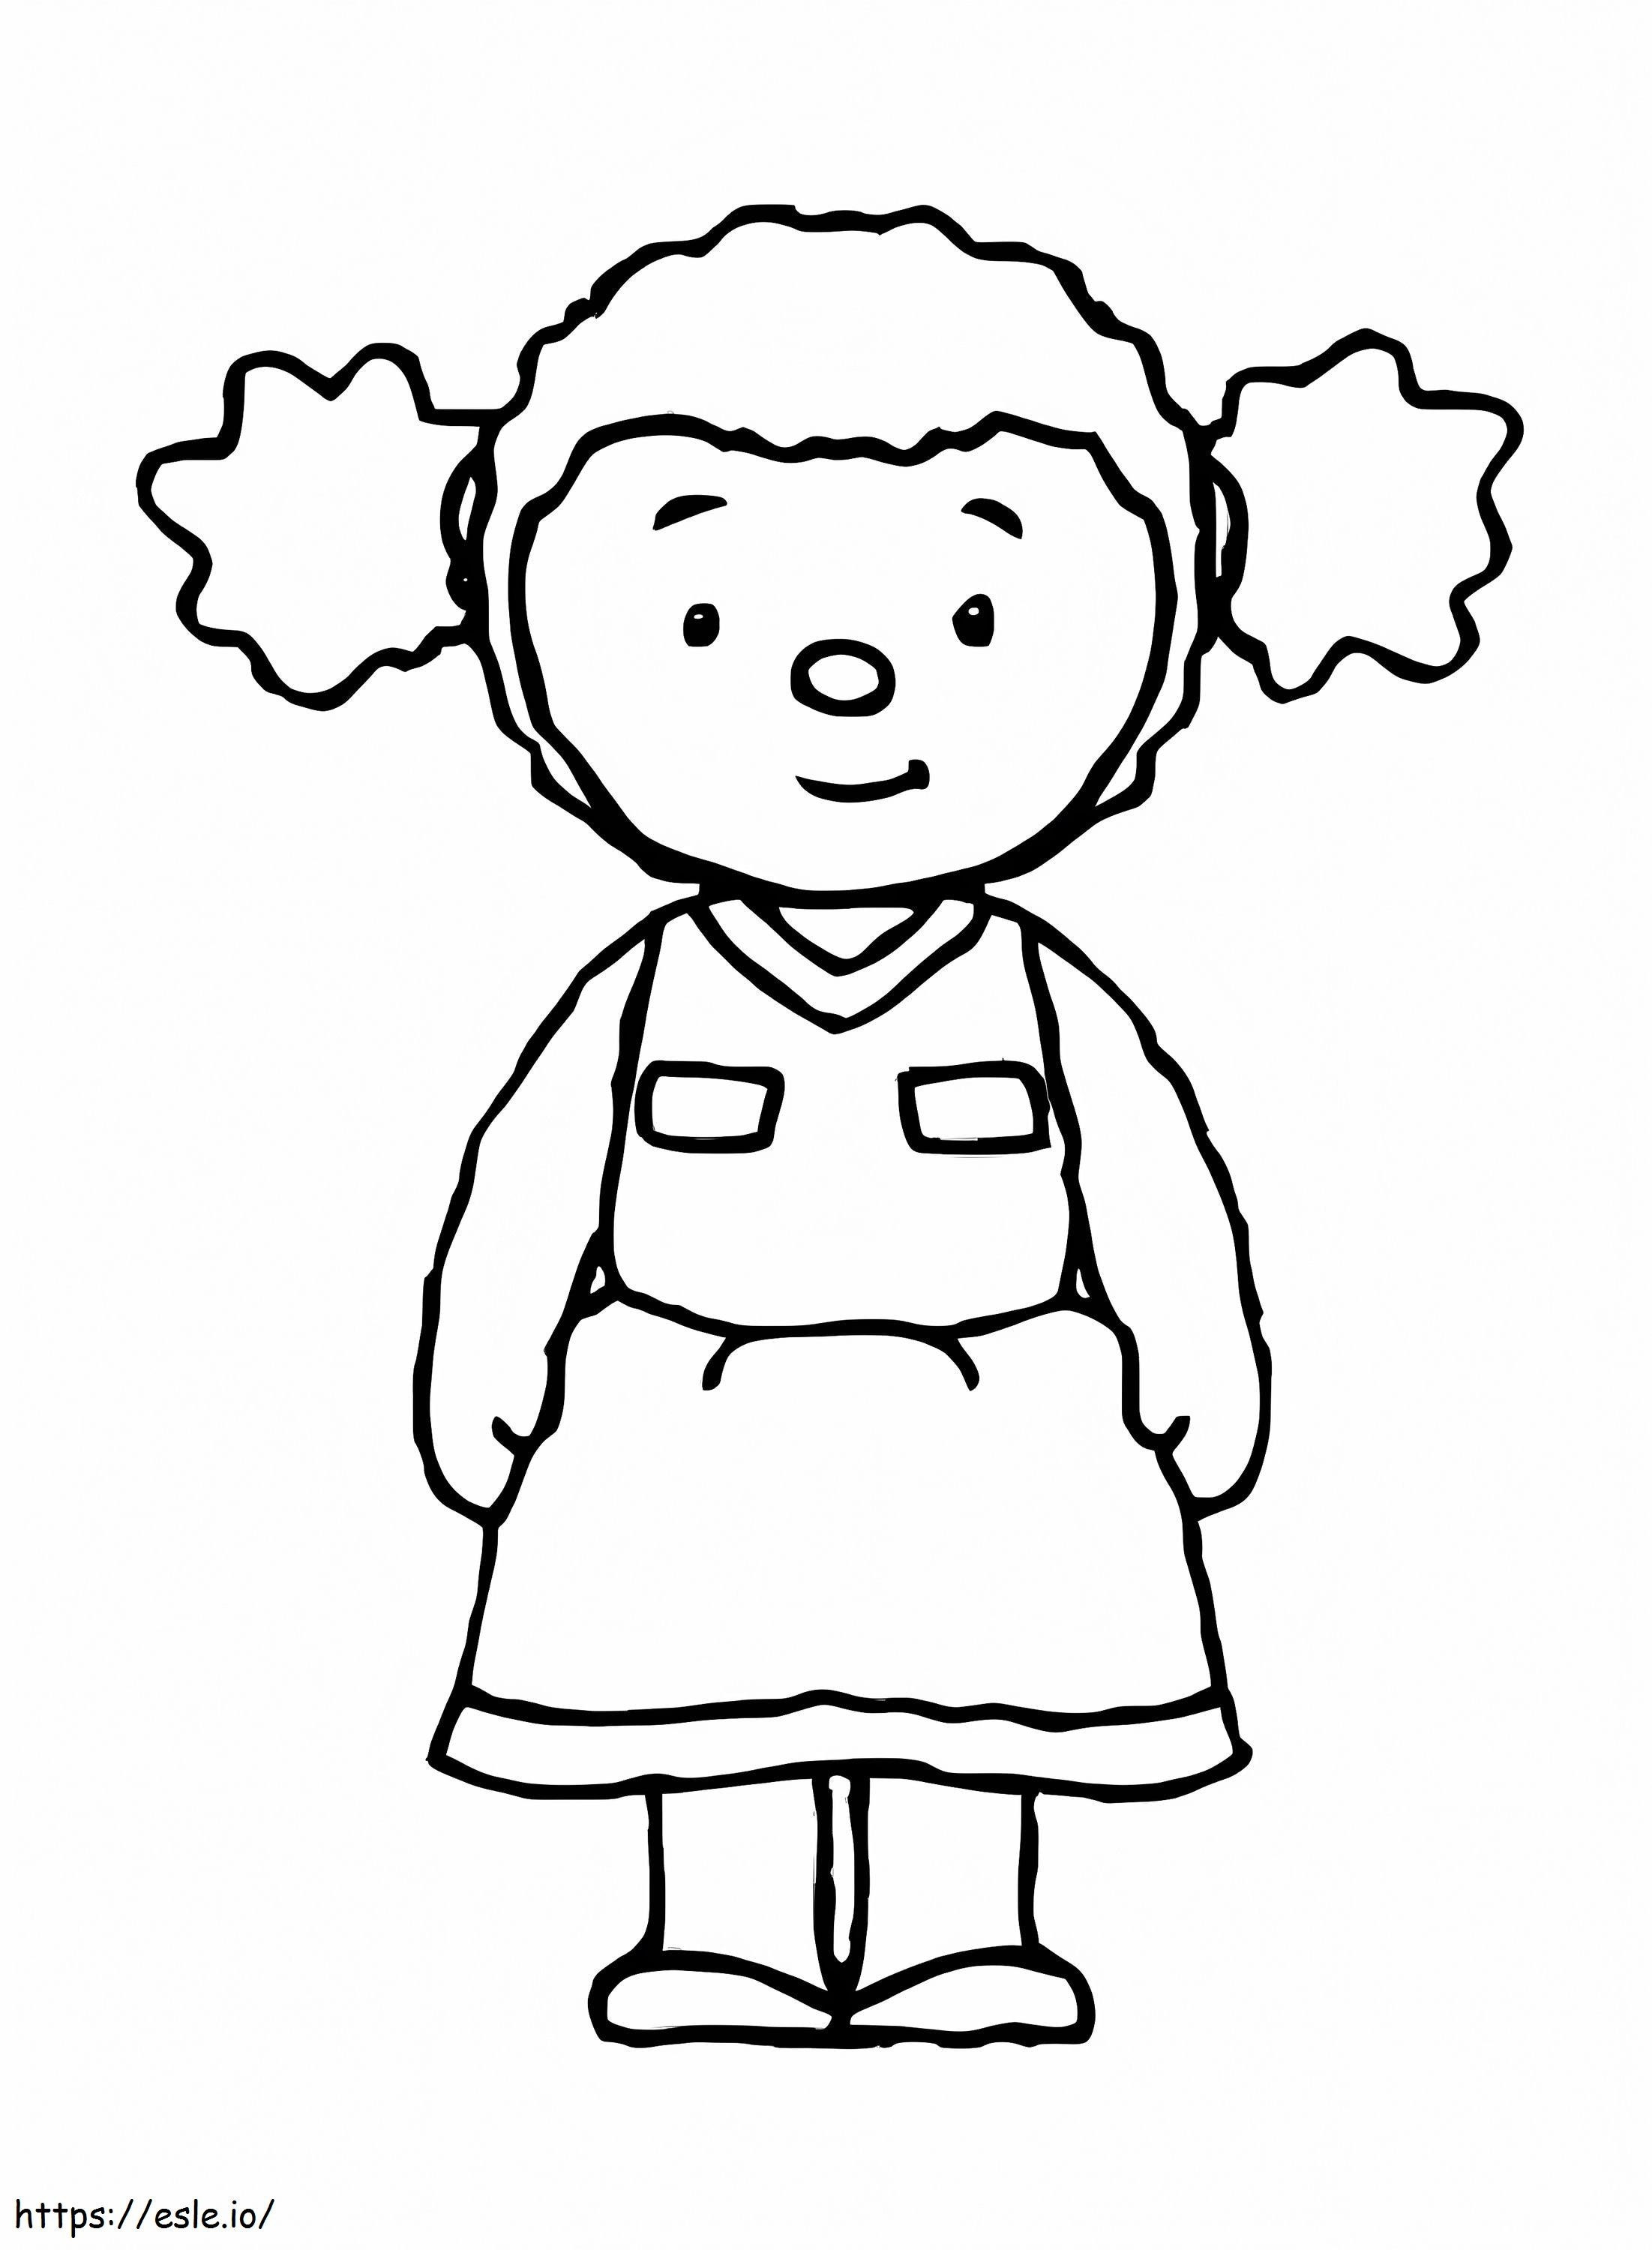 Tchoupi 9 1 coloring page